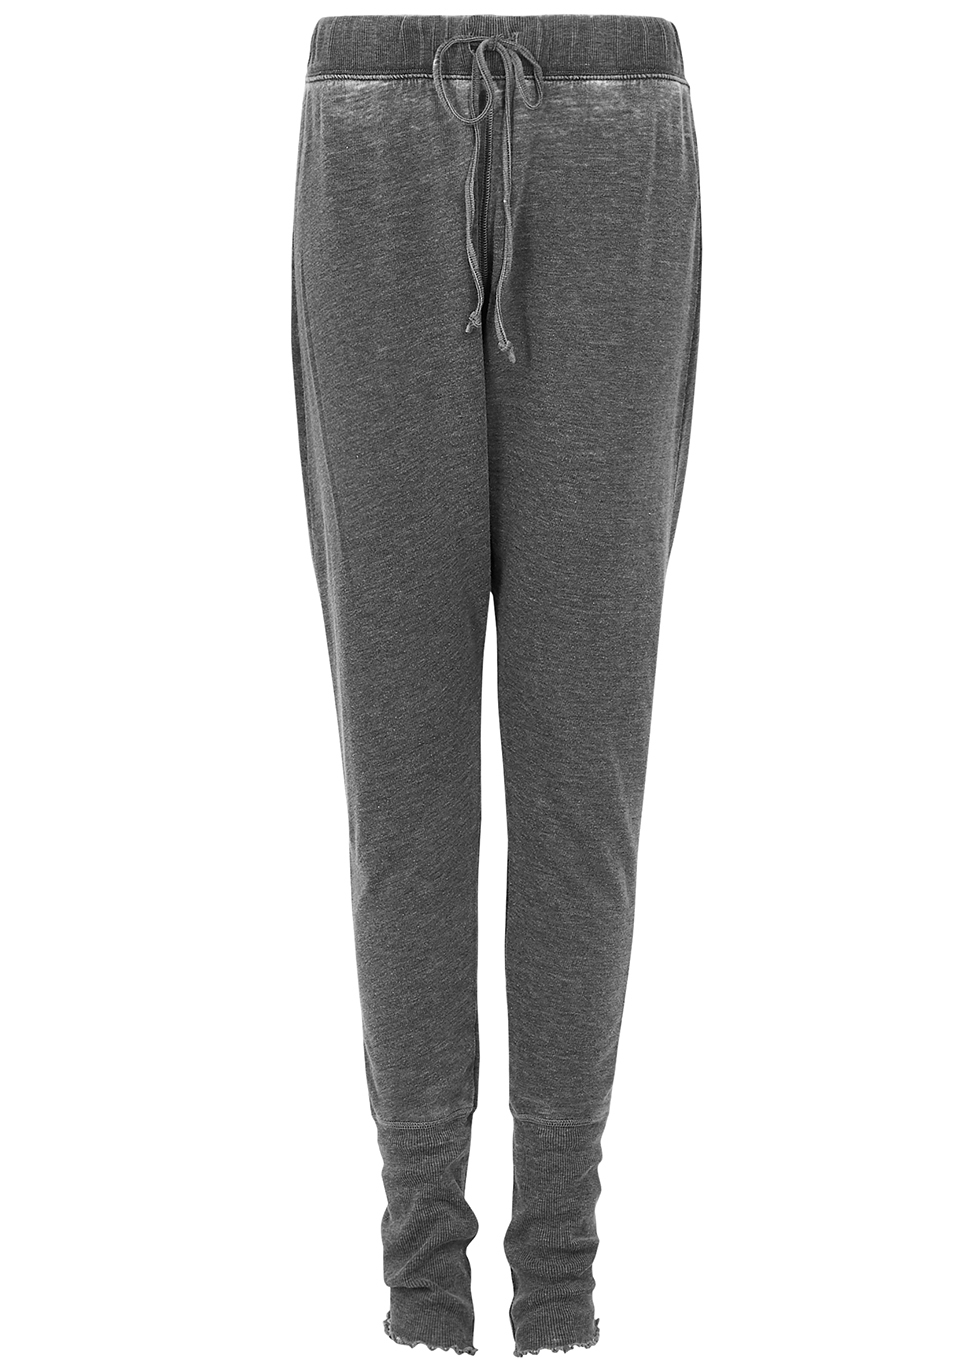 Cozy All Day grey jersey sweatpants